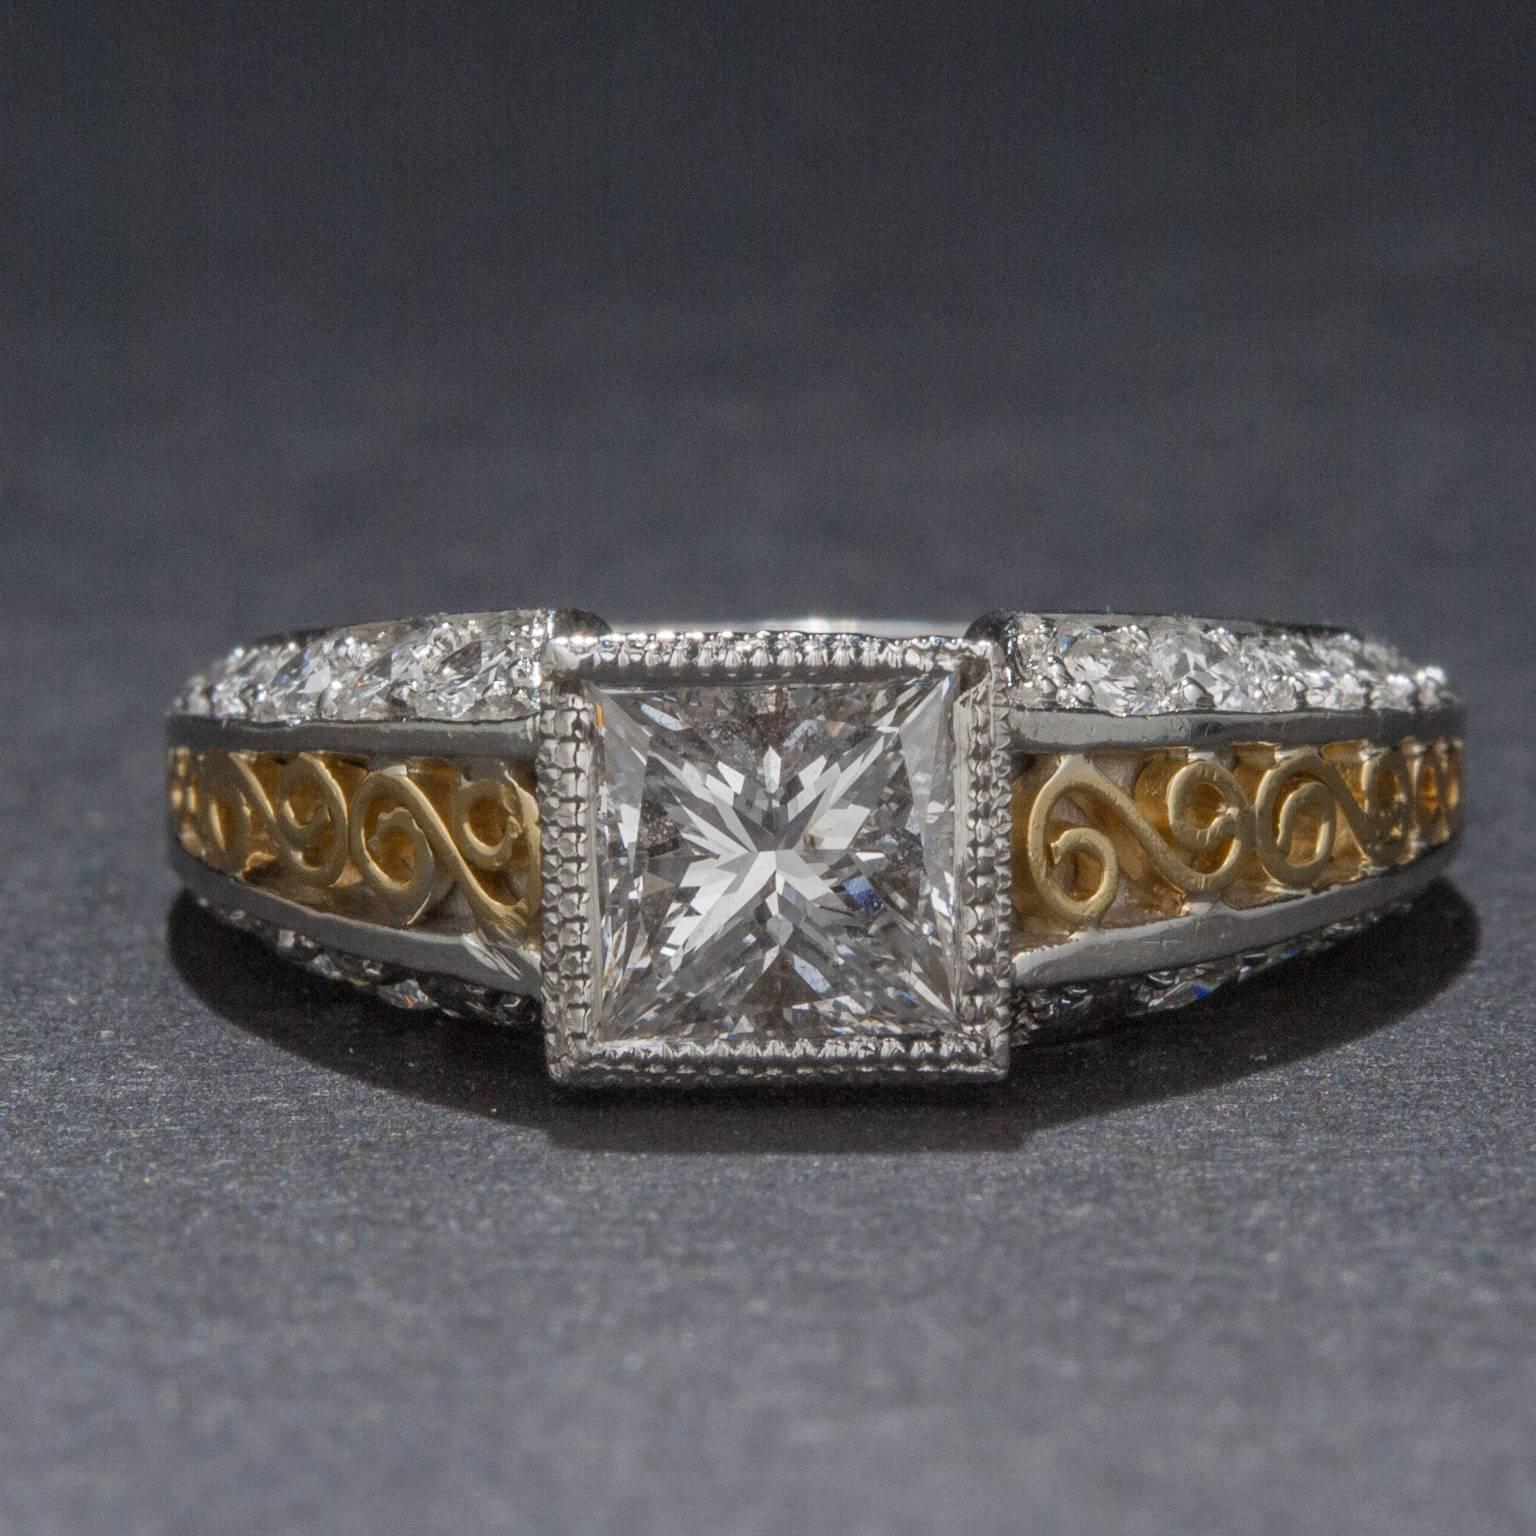 A beautiful .91 carat princess cut diamond dazzles at the center of this extraordinary vintage style ring. The platinum and 18k yellow gold mounting features an additional 28 diamonds for a total weight of .83 total carats. The shank is decorated